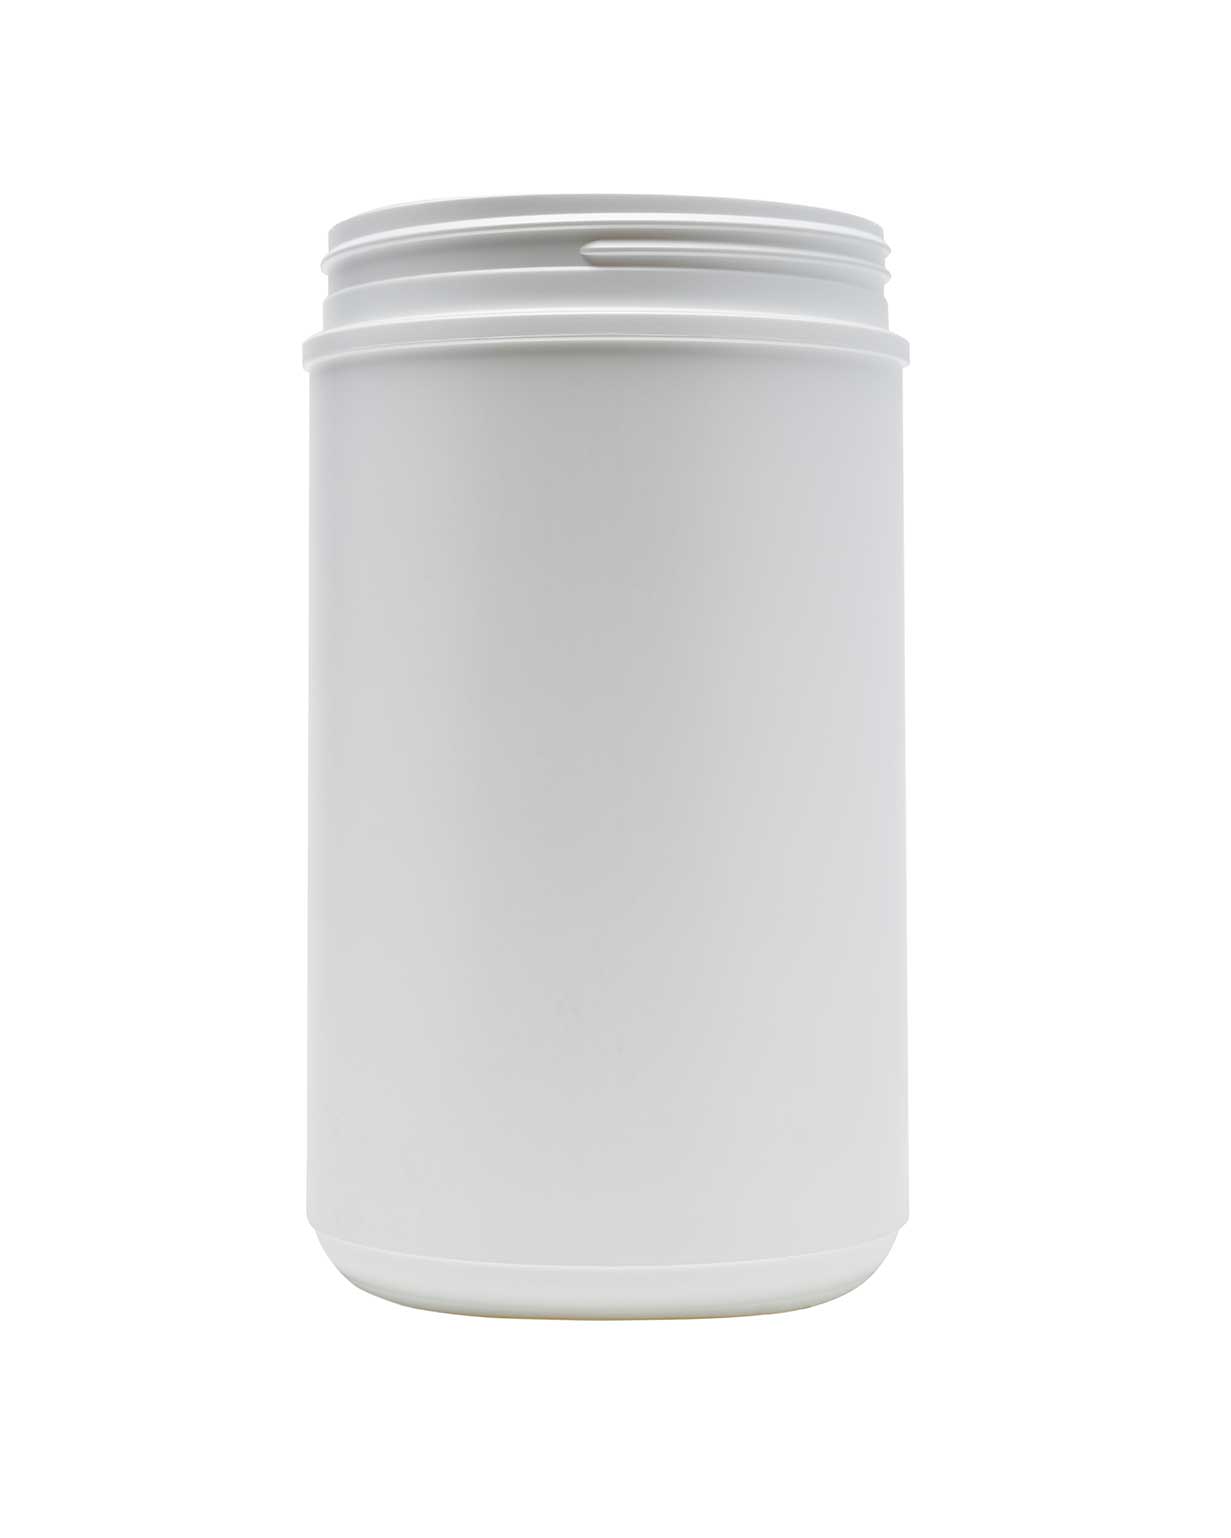 76 oz hdpe white straight sided canister 120-400